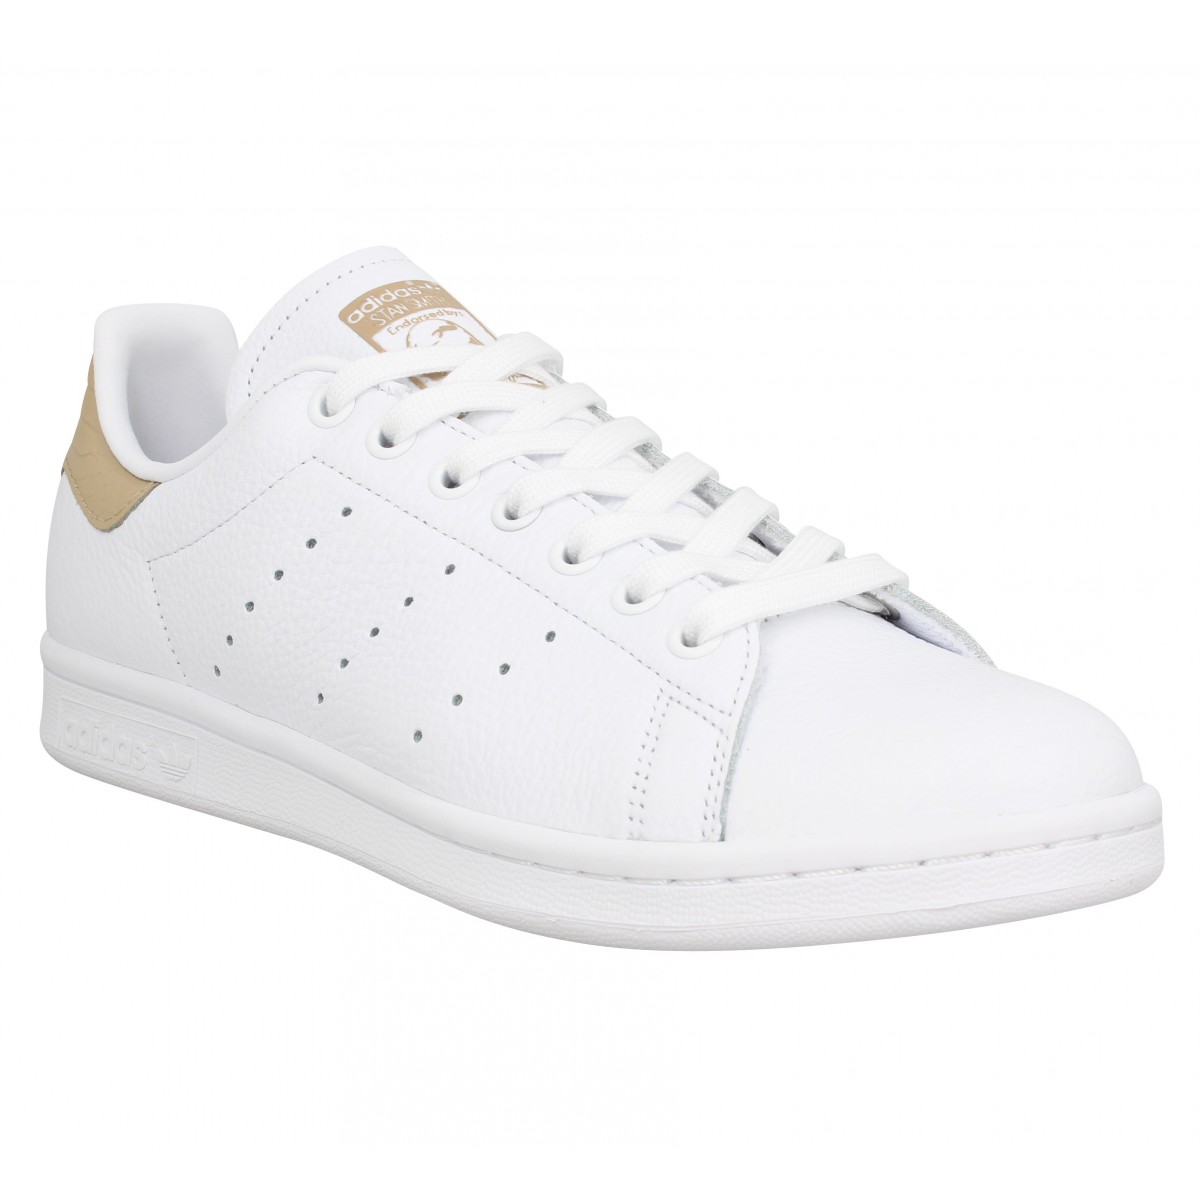 chaussures femme adidas stan smith